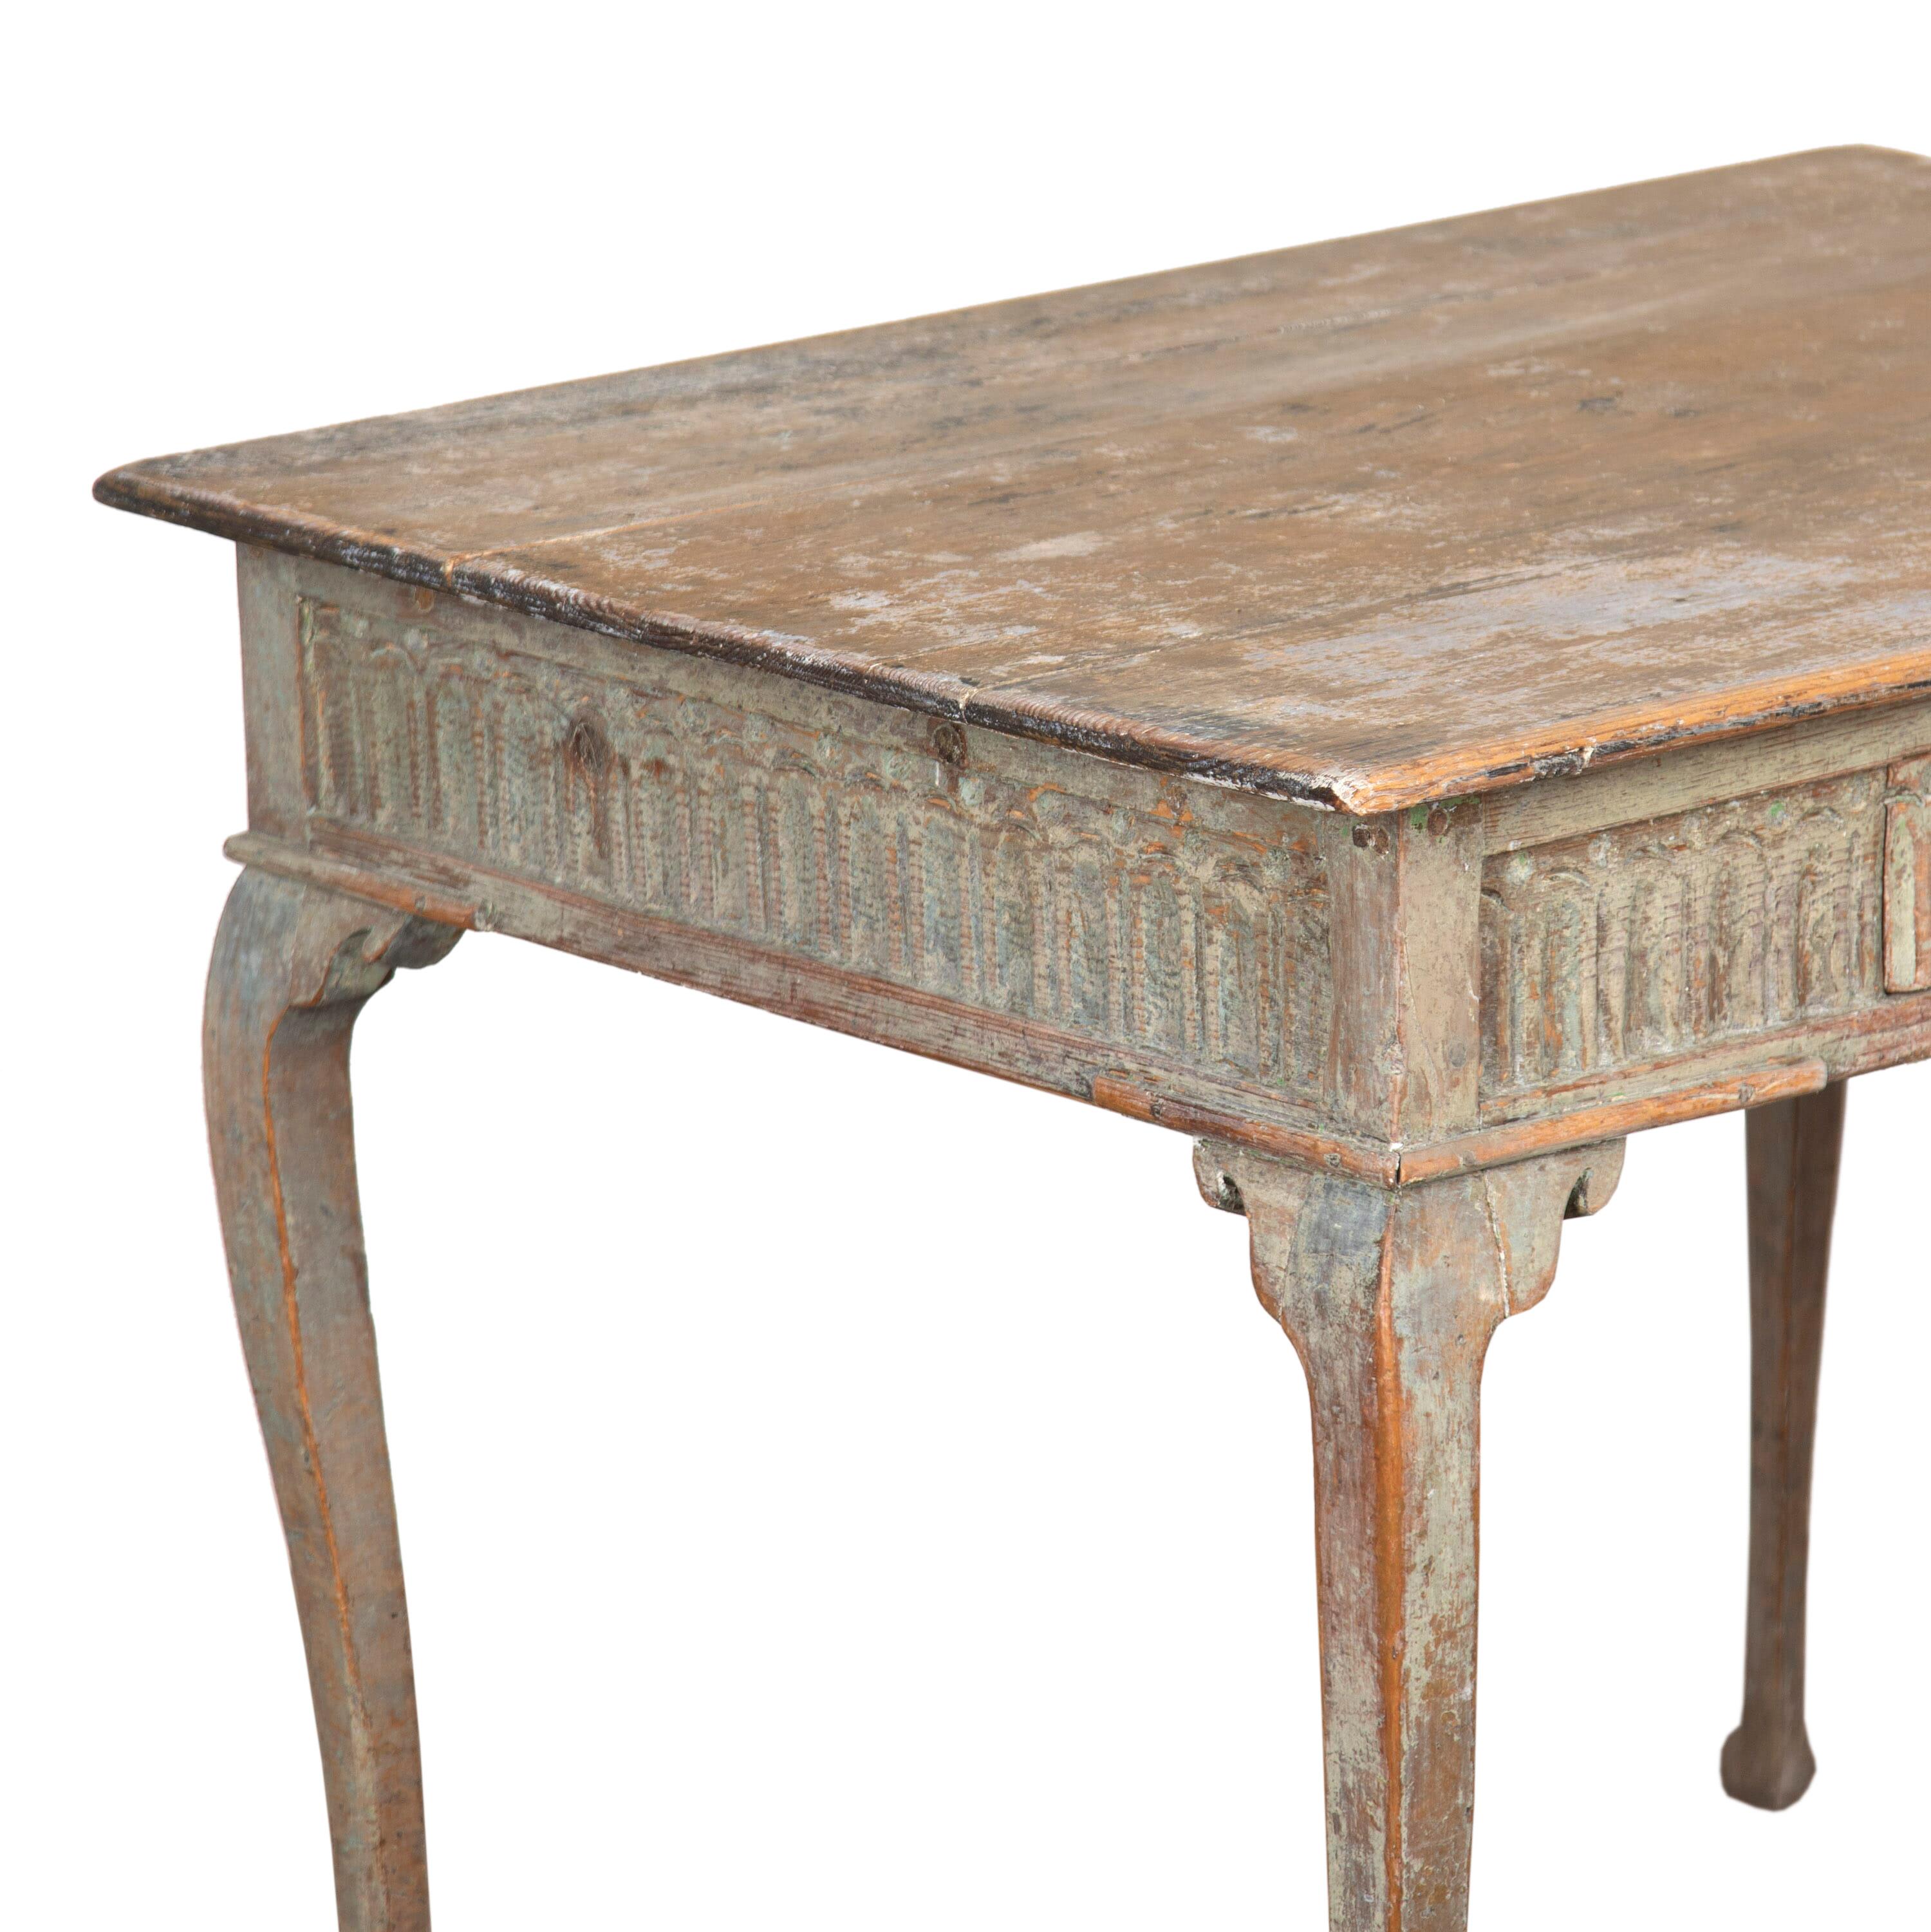 Wood Exceptional 18th Century Table in Original Paint from Finland